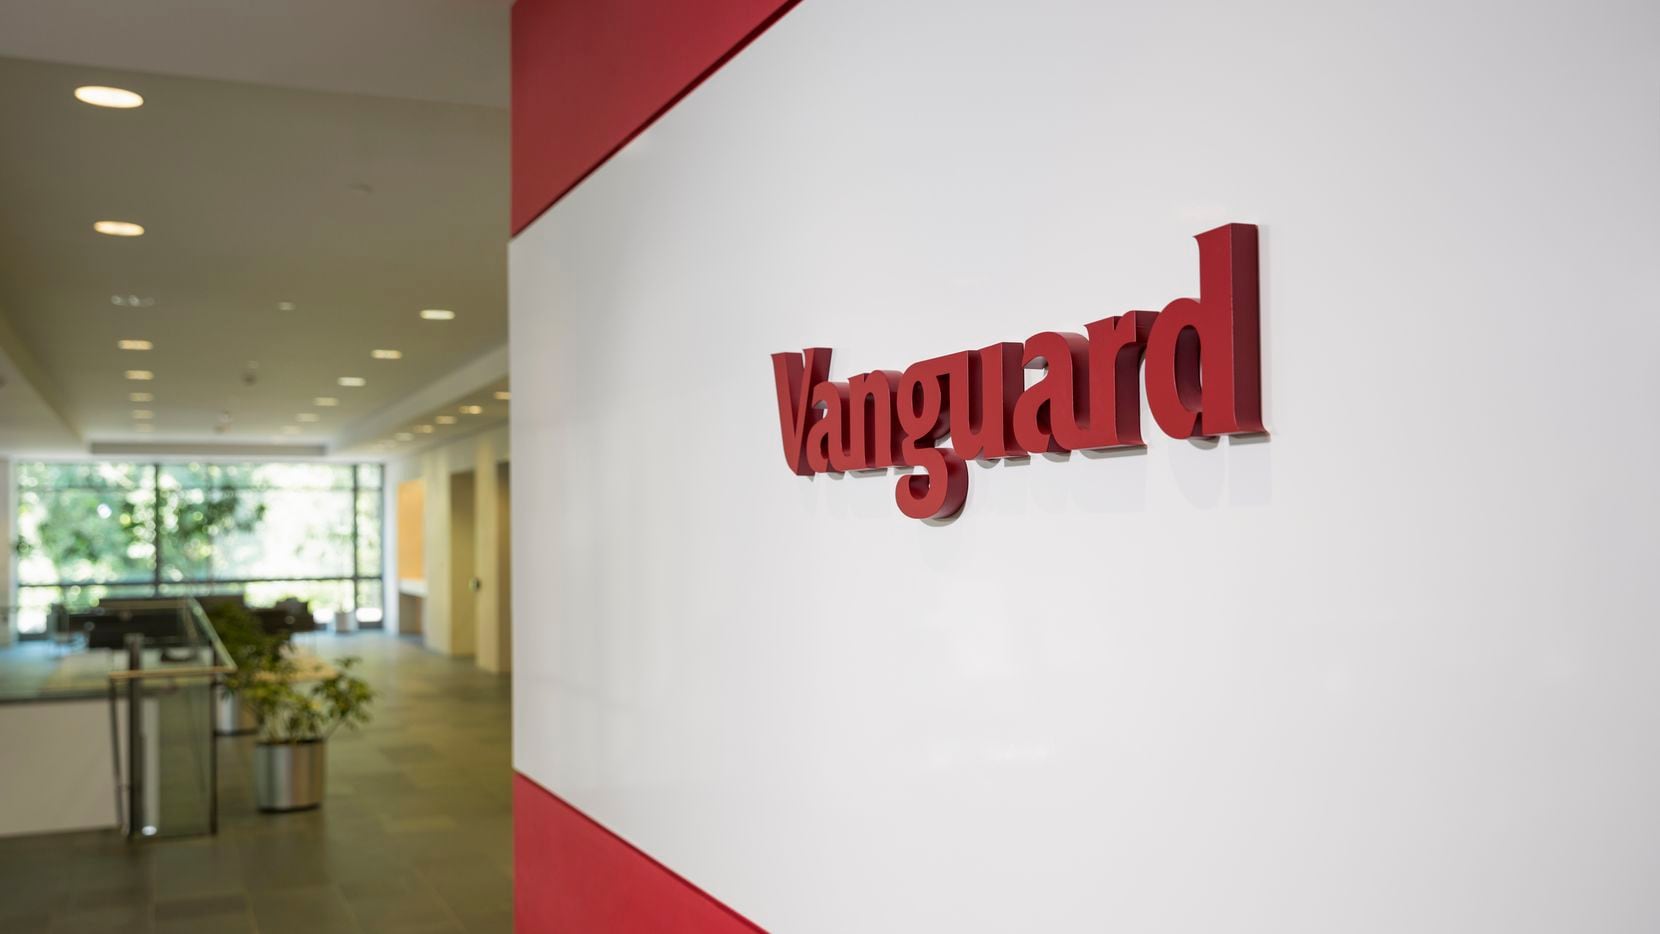 Vanguard is opening its fifth U.S. location in Dallas. It will focus on its Personal Adviser Services.